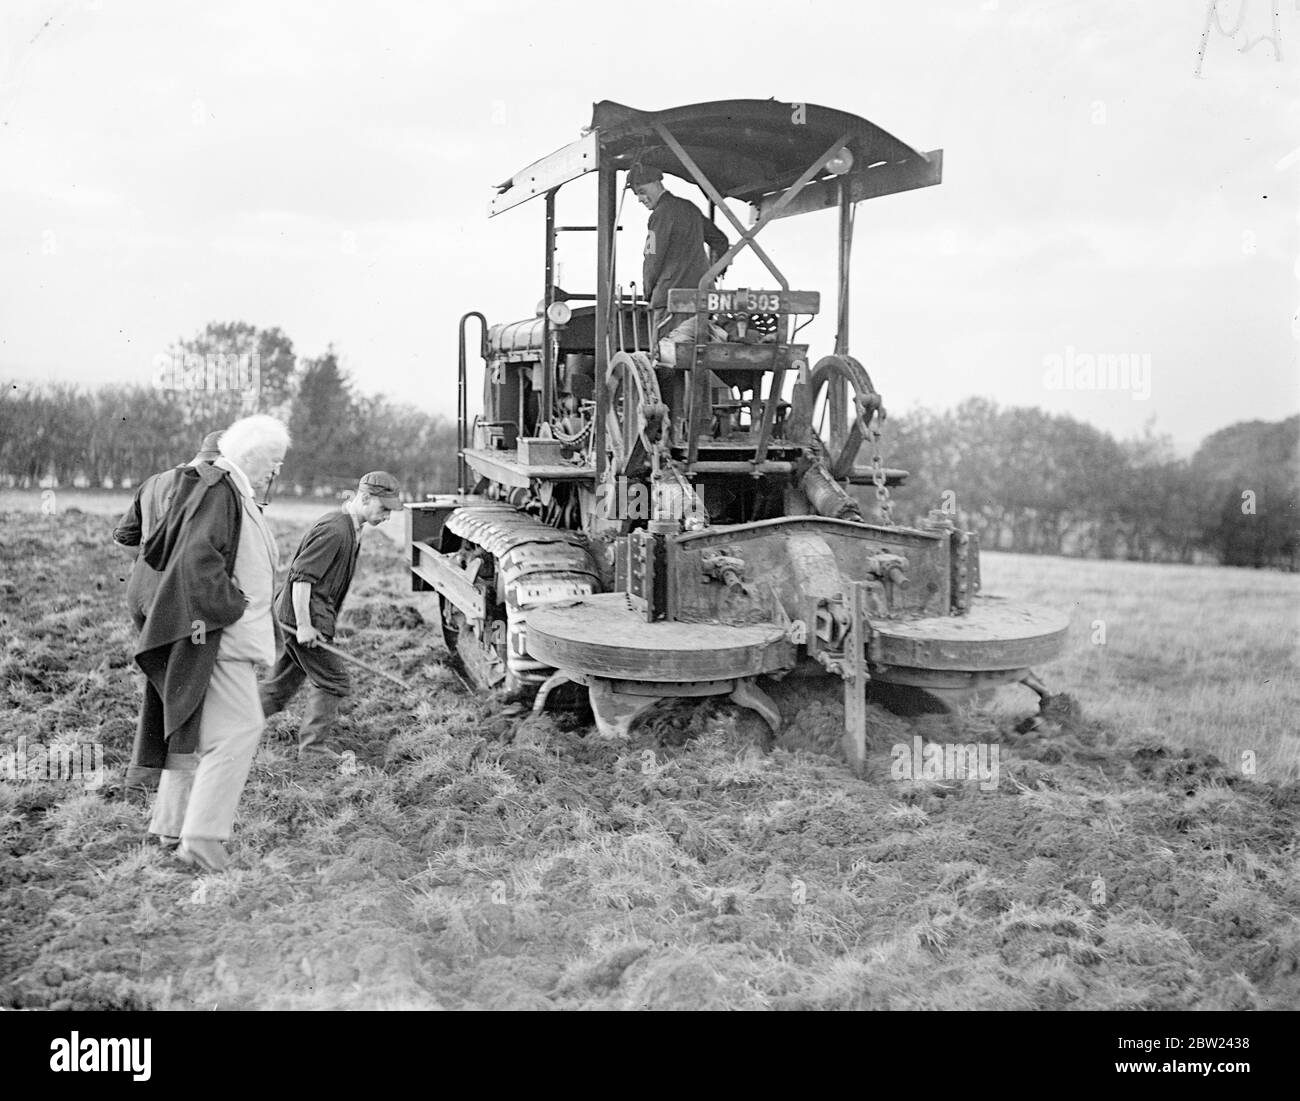 Employing a new gyro-tiller, a plough for digging, and men working day and night shifts. Mr Lloyd George, veteran politician who is now 75, is turning 160 acres of idle land into a market garden in record time. The land, which adjoins his farm at Churt, Surrey, has not been intensely cultivated for many years but already half acreages is ready for planting. The men work at night by searchlight. Photo shows: Mister Lloyd George watching the rotating gyro tiller at work on his new farm. 17 October 1938 Stock Photo